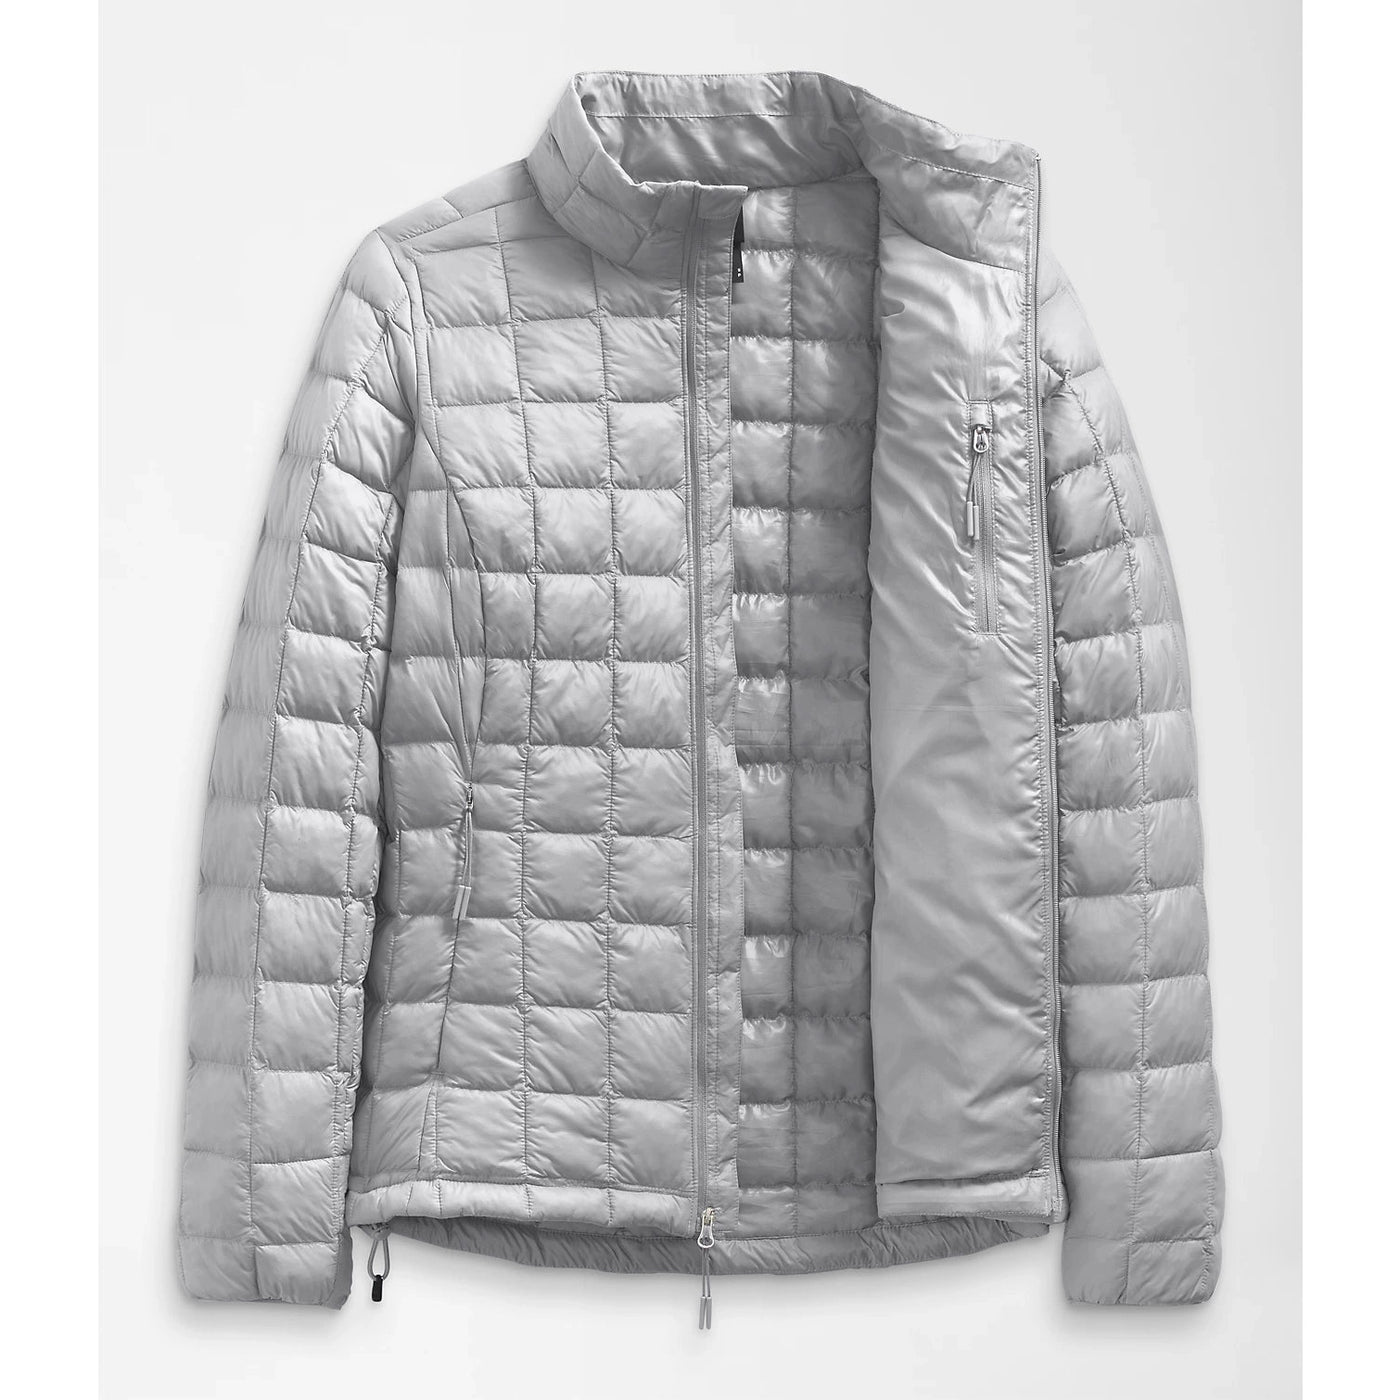 The North Face Women's Thermoball Eco Jacket 2.0 Jacket-Women's Clothing-MELD GREY-XS-Kevin's Fine Outdoor Gear & Apparel